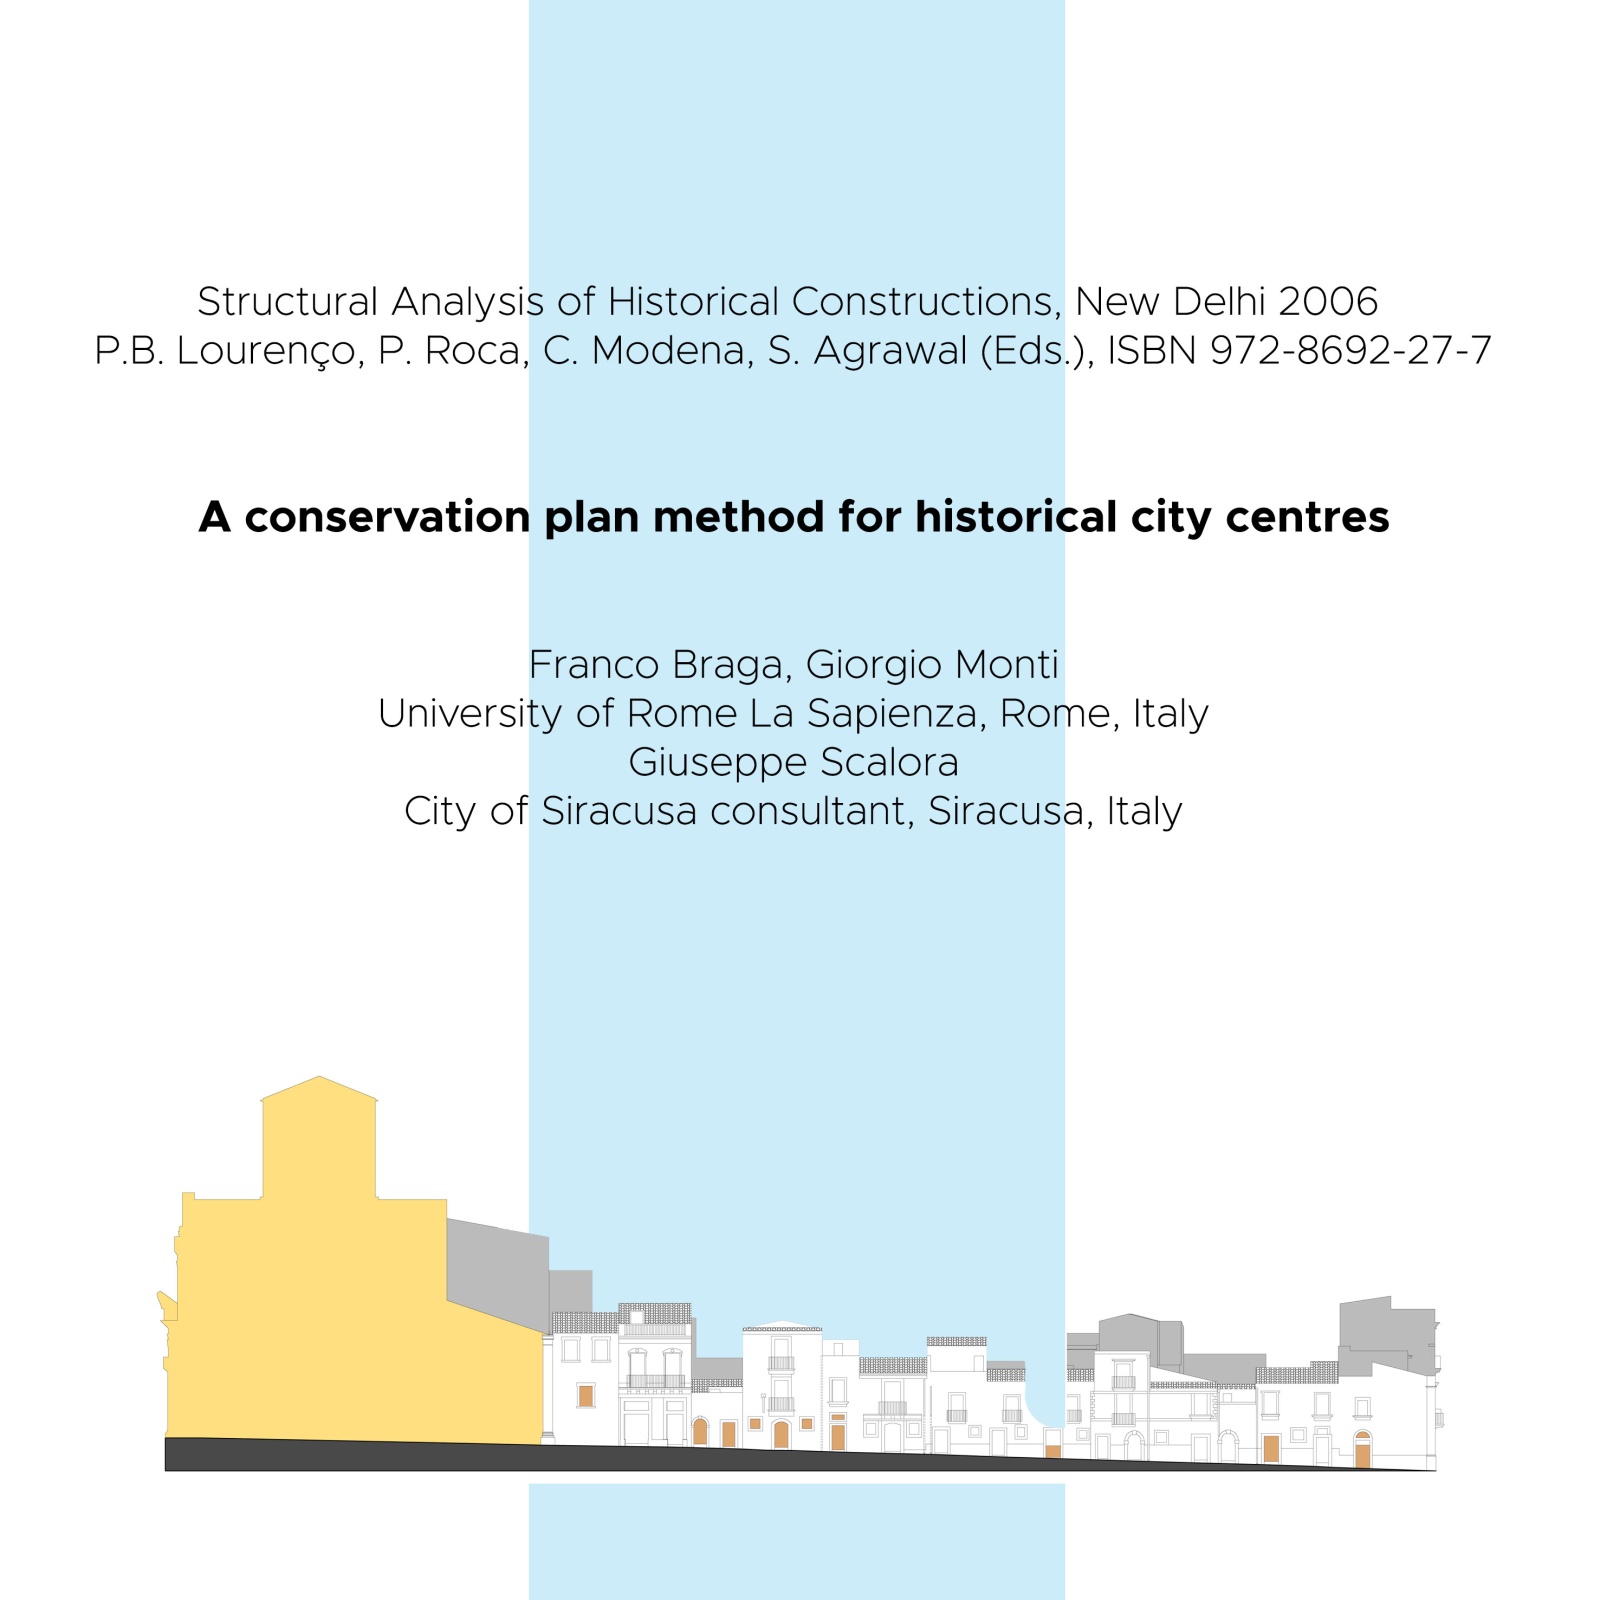 2006 - A conservation plan method for historical city centres